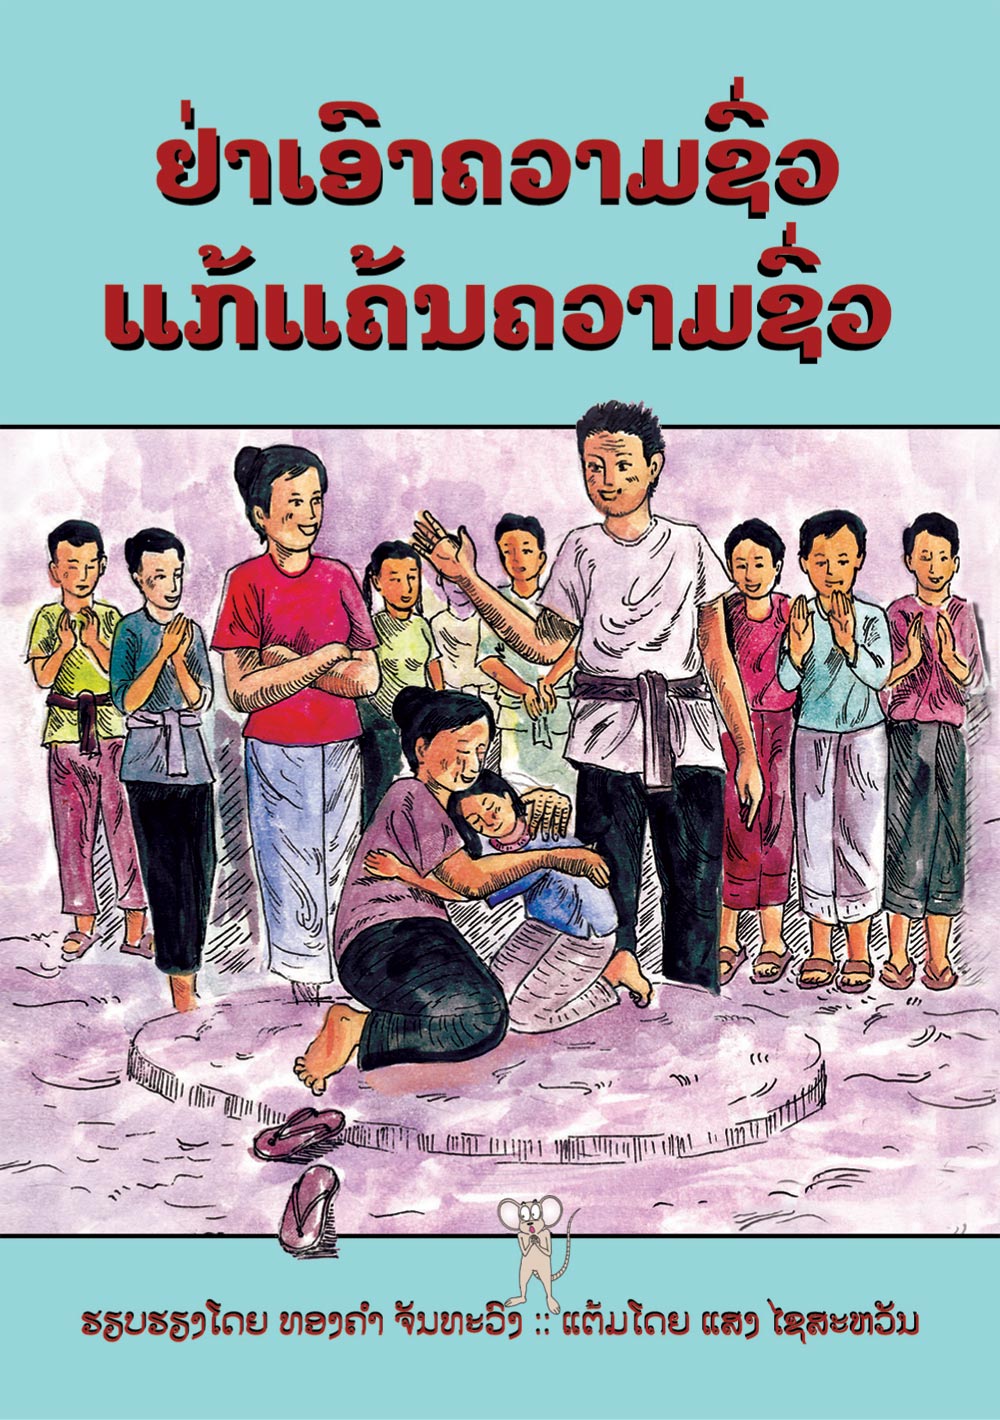 Don't Return Evil For Evil large book cover, published in Lao language